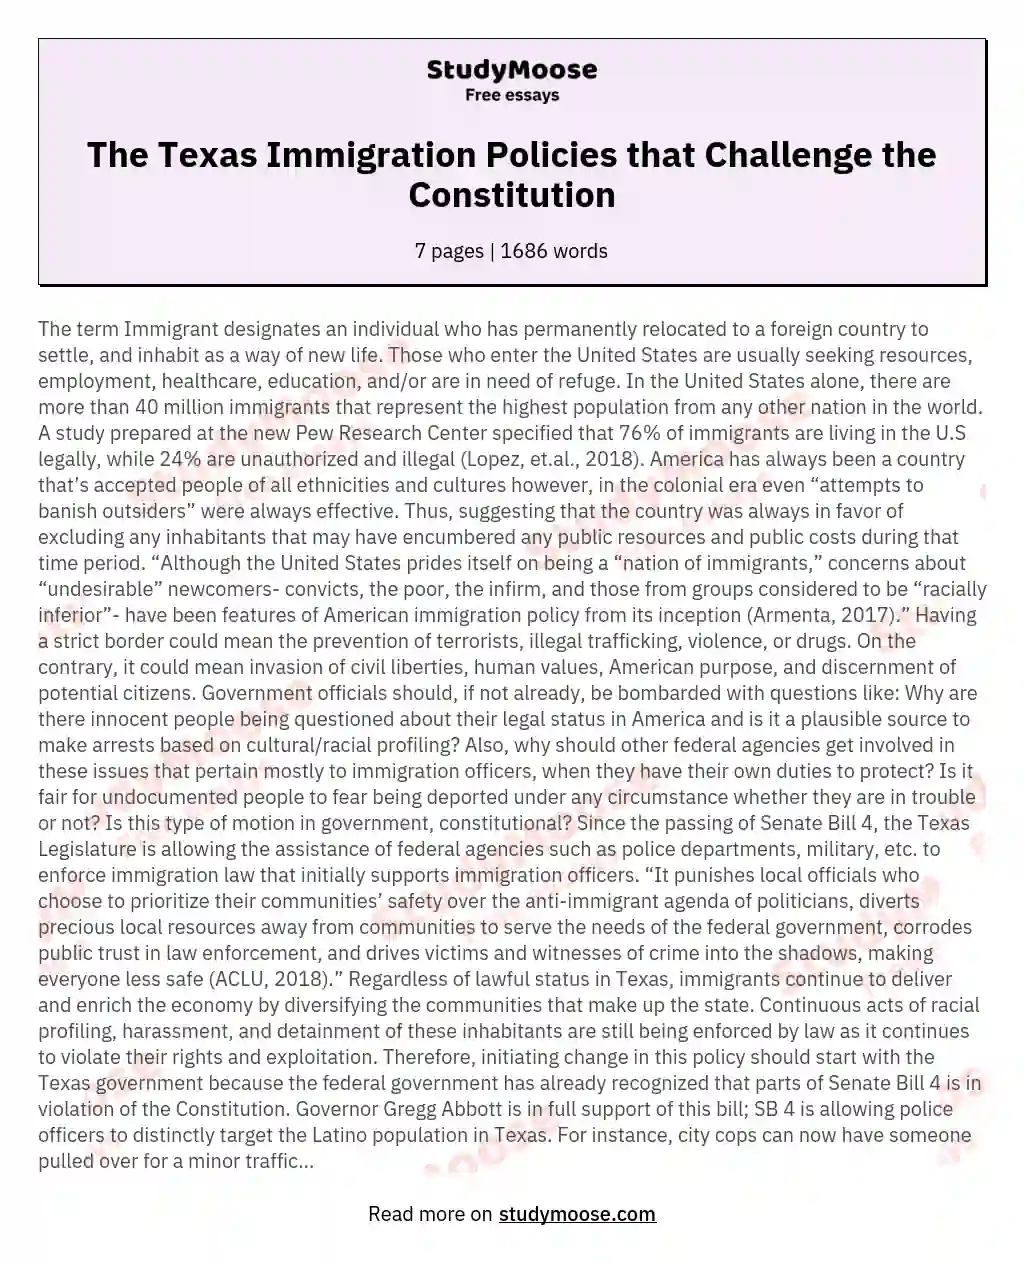 The Texas Immigration Policies that Challenge the Constitution essay